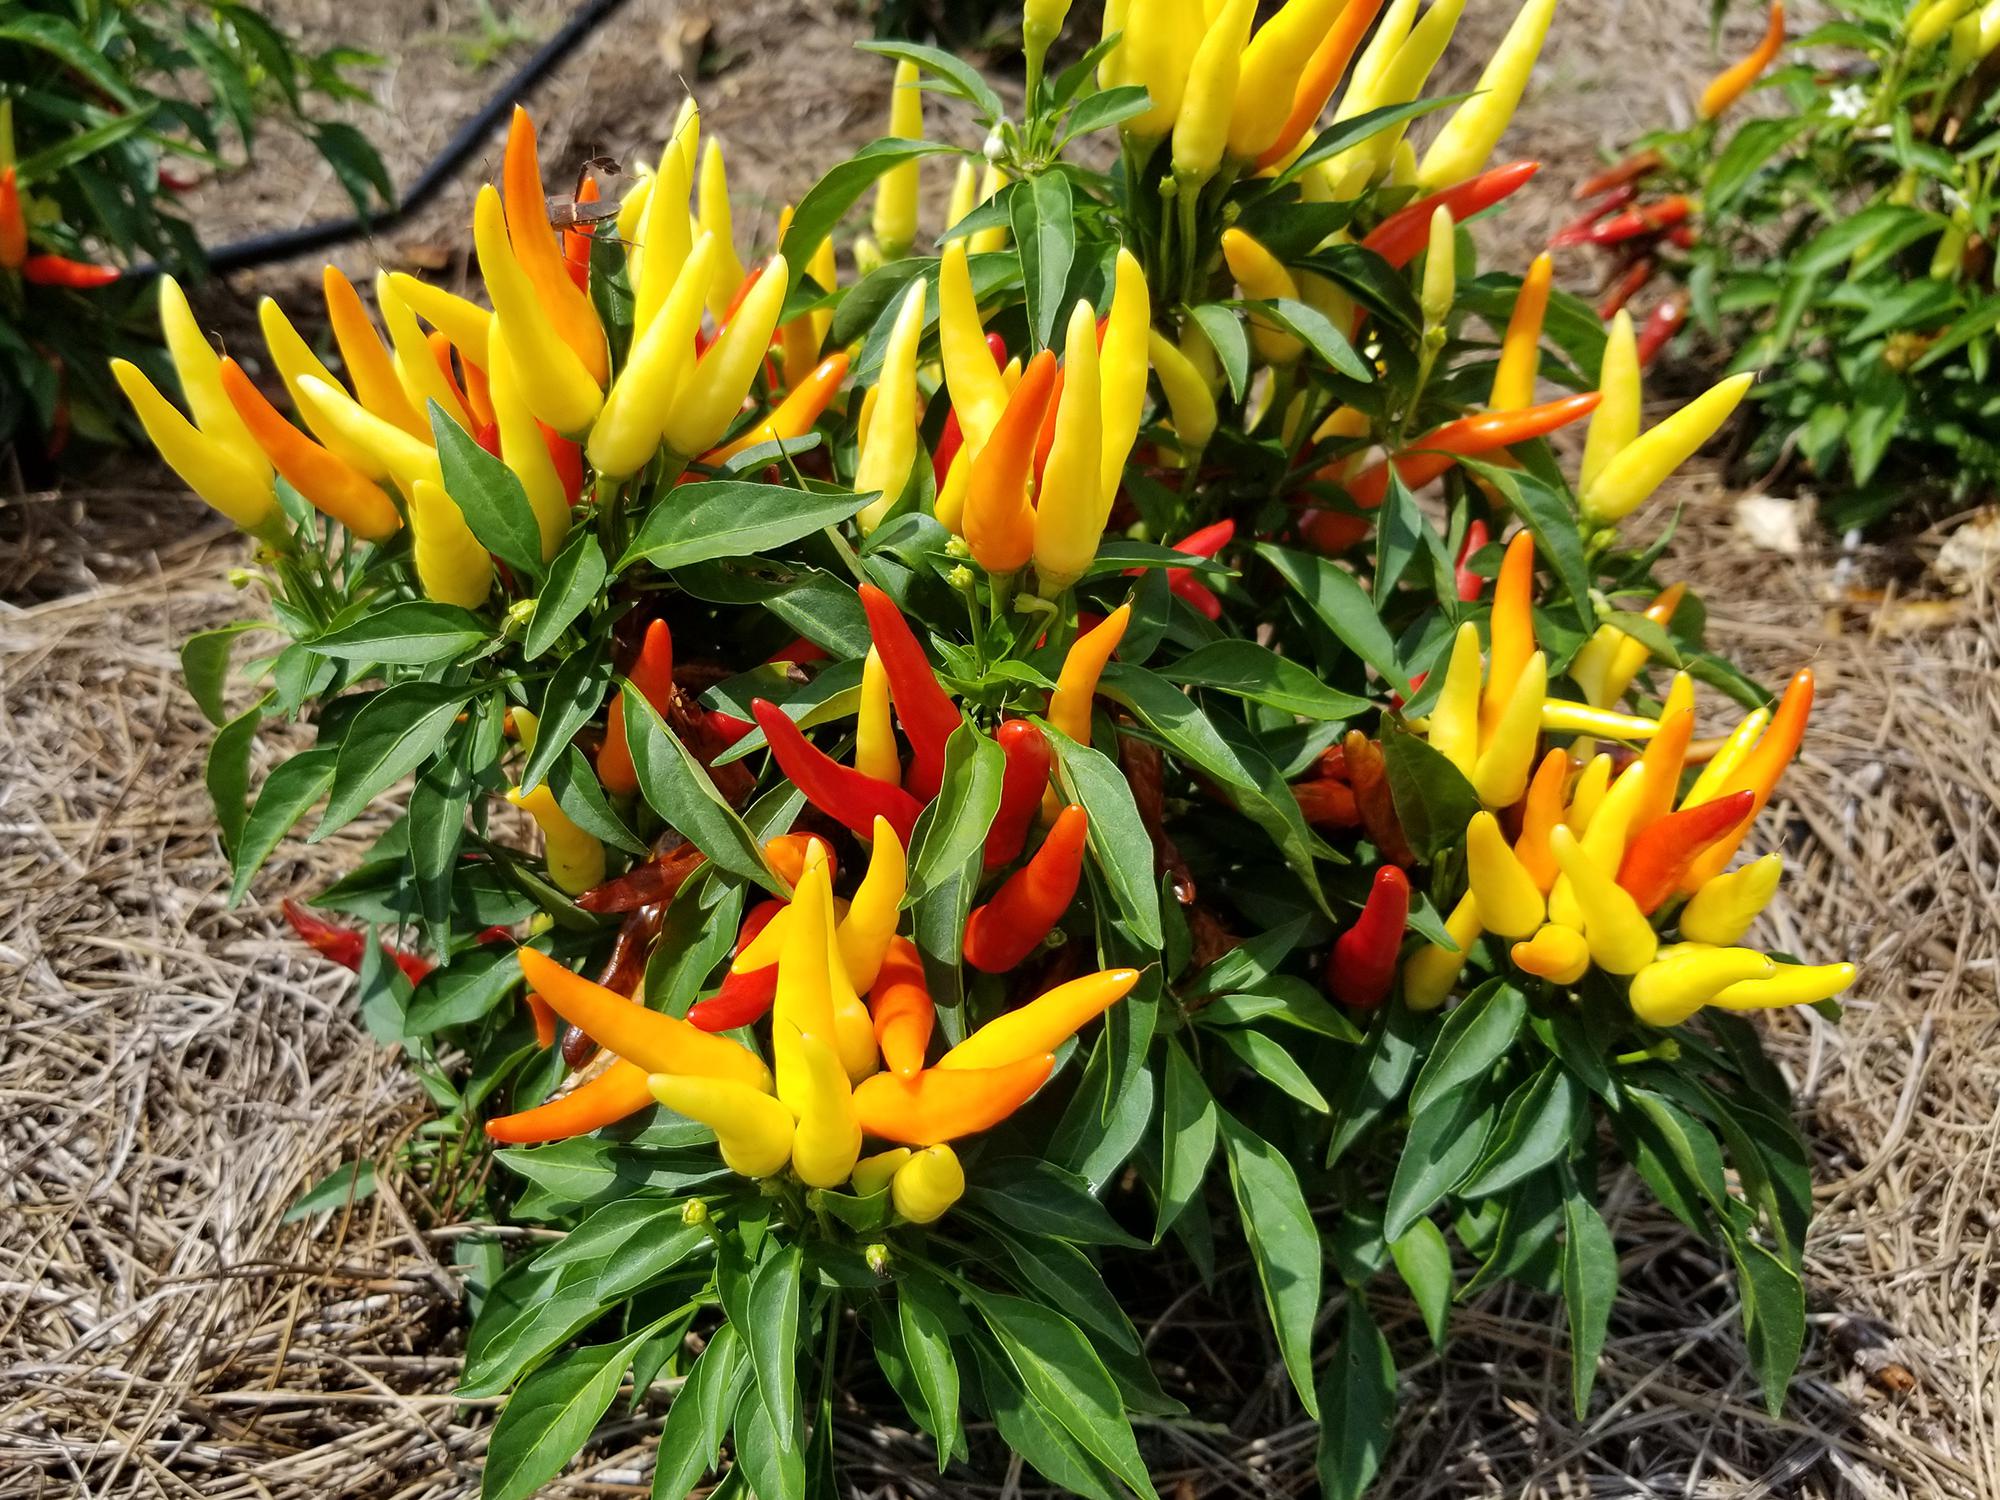 Plants with mostly yellow peppers and some orange and red peppers perched on a bed of pine straw.